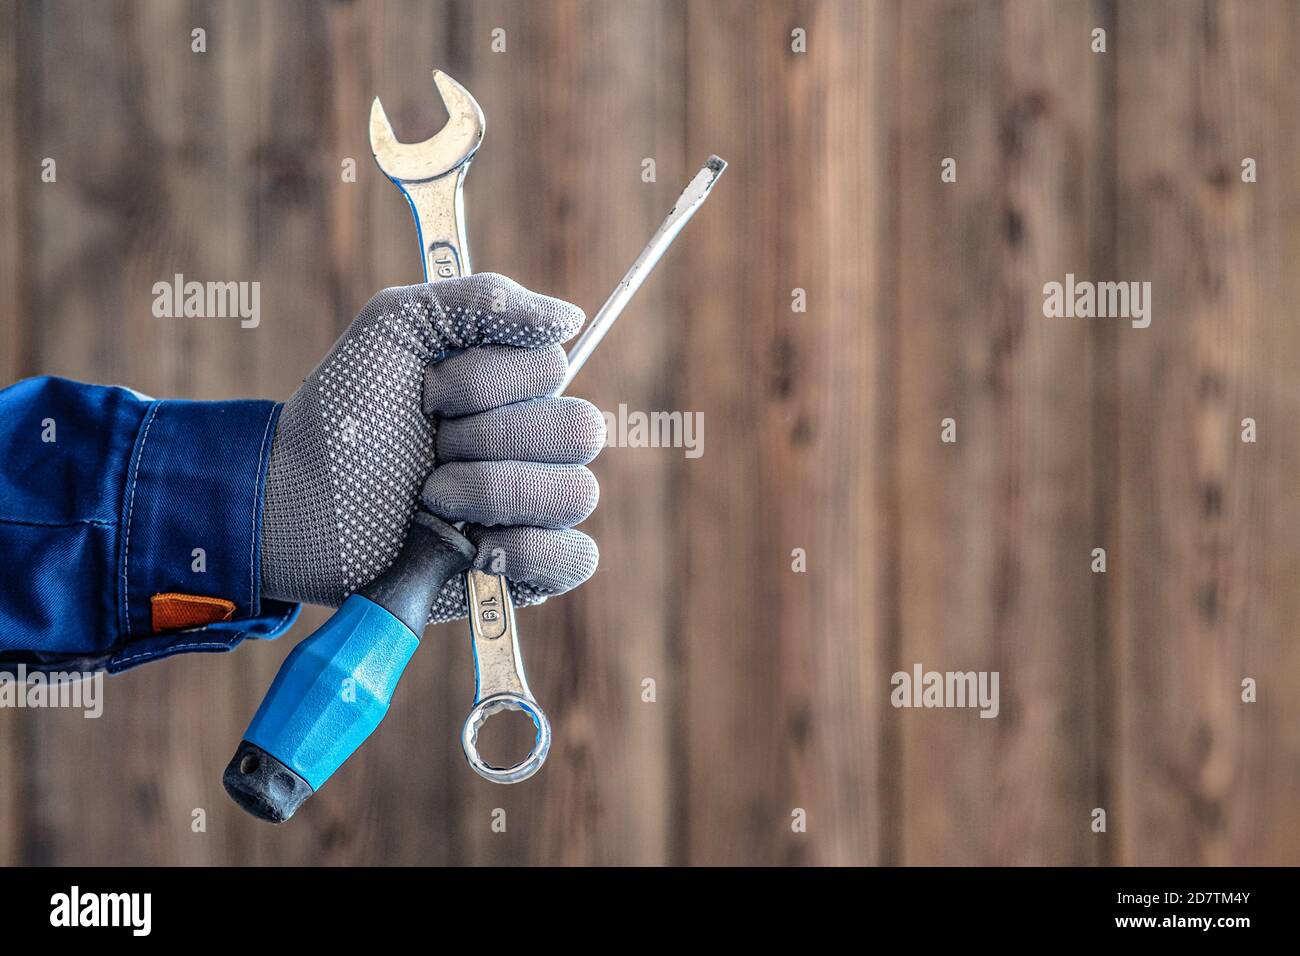 Locksmith maintenance work. The master holds a key and a screwdriver in his hand Stock Photo